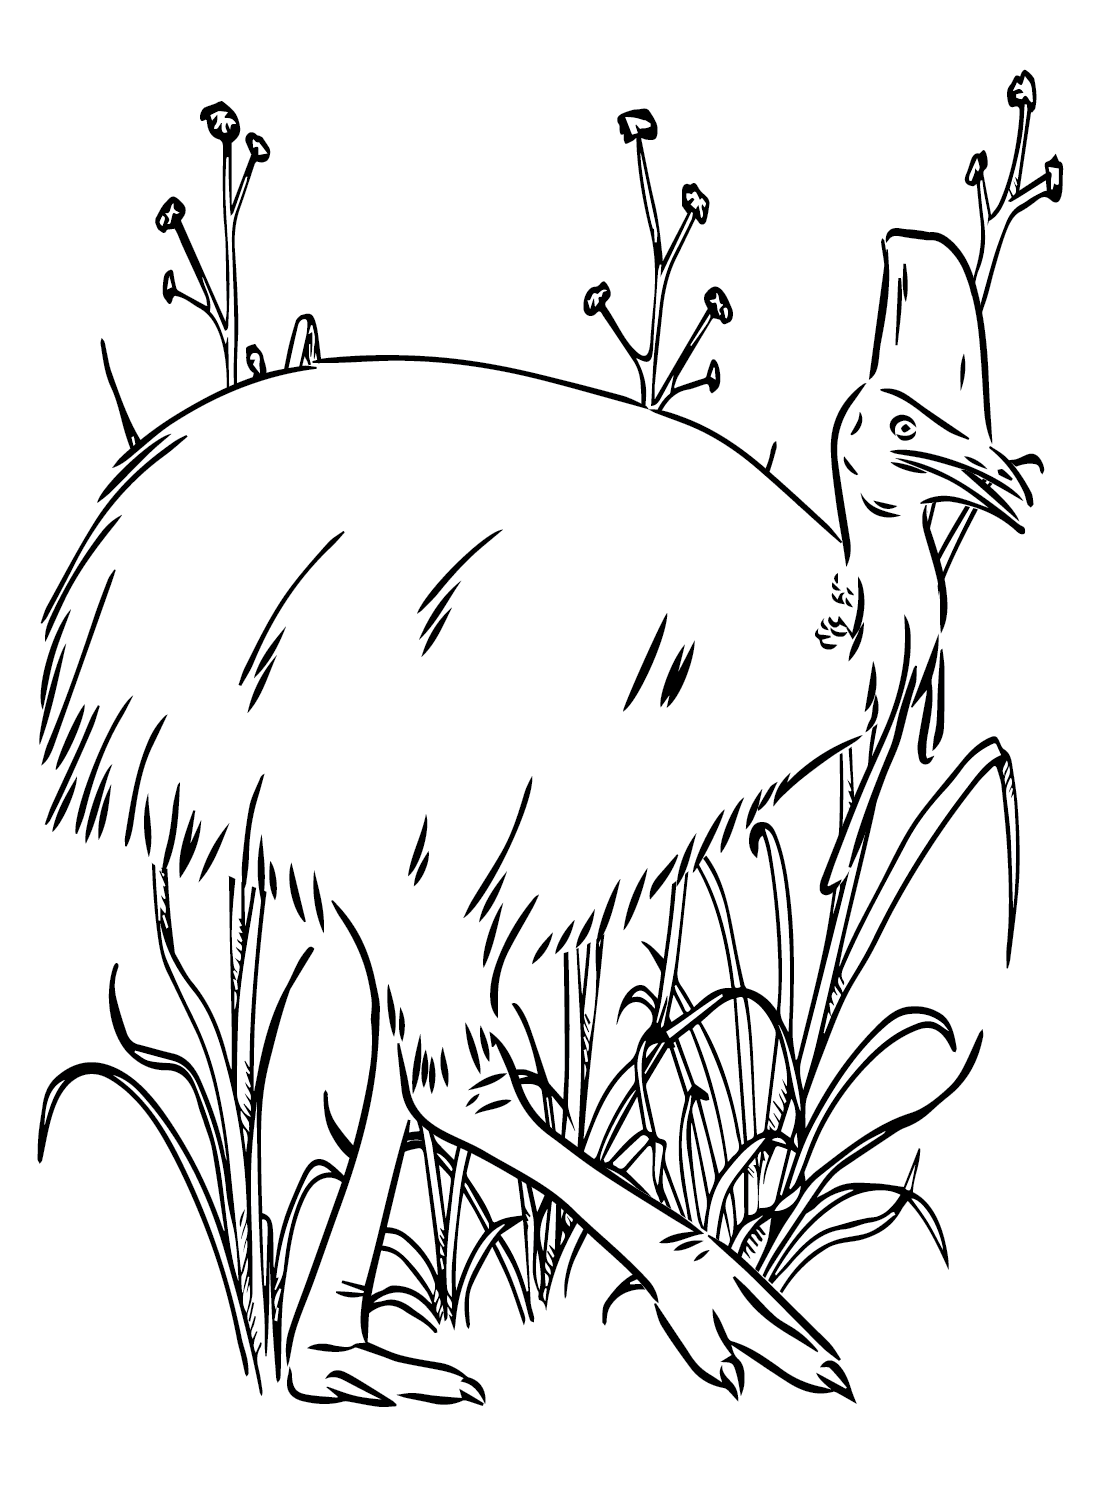 Cassowary Coloring Pages to Printable from Cassowary